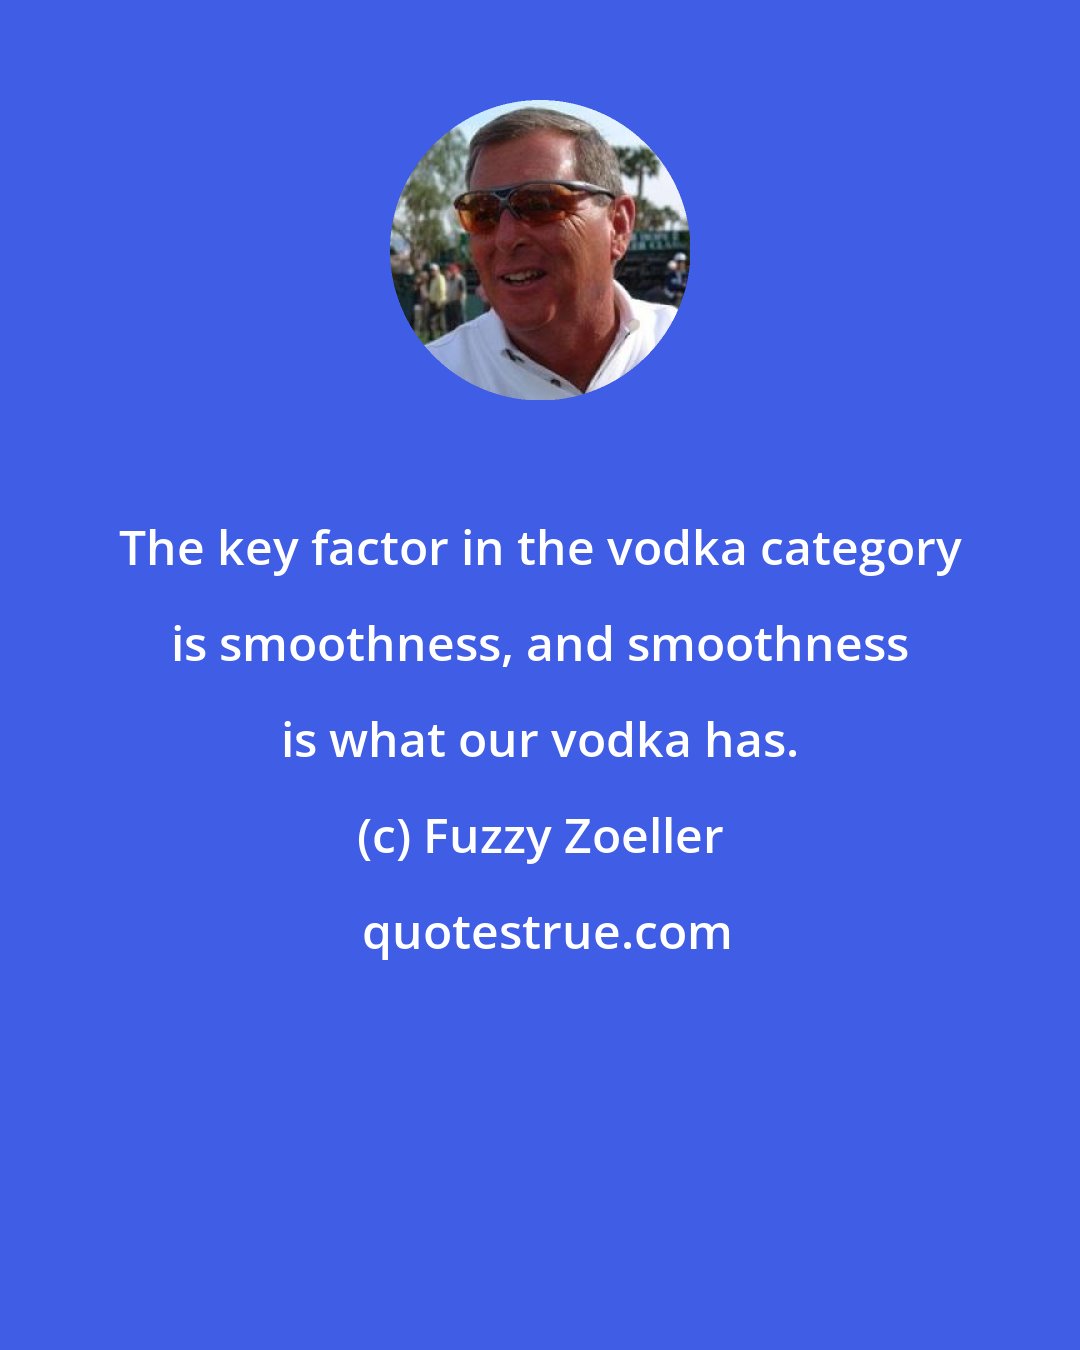 Fuzzy Zoeller: The key factor in the vodka category is smoothness, and smoothness is what our vodka has.